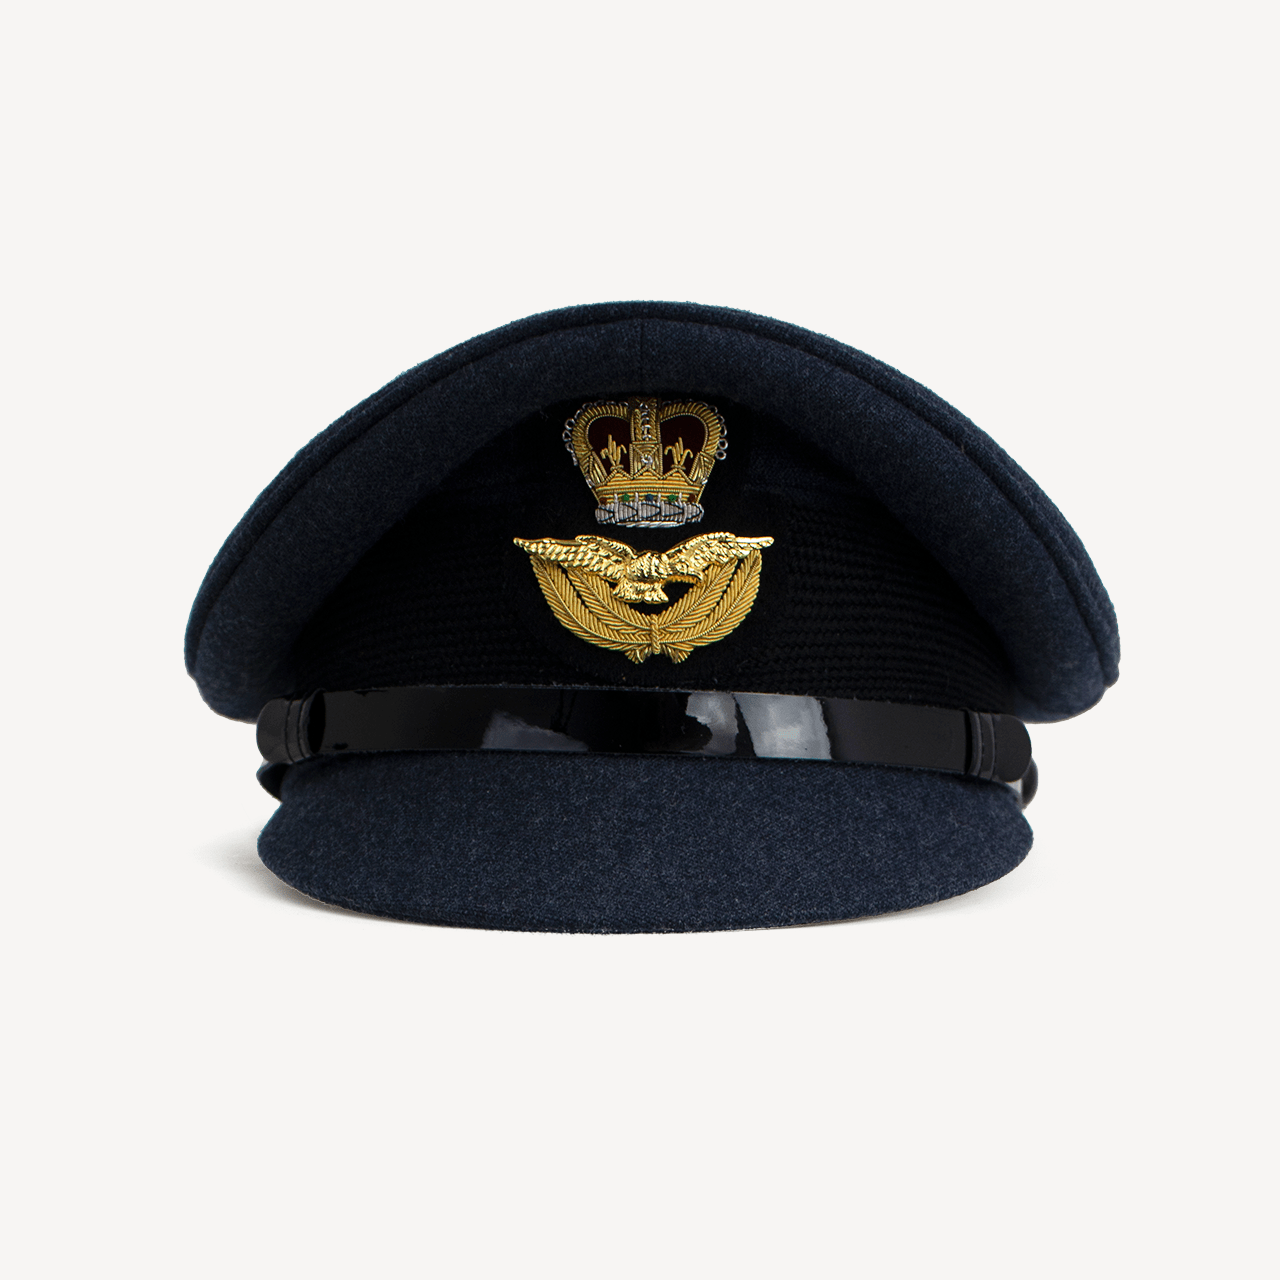 ROYAL AIR FORCE No.1 SERVICE DRESS HATS - Swaine